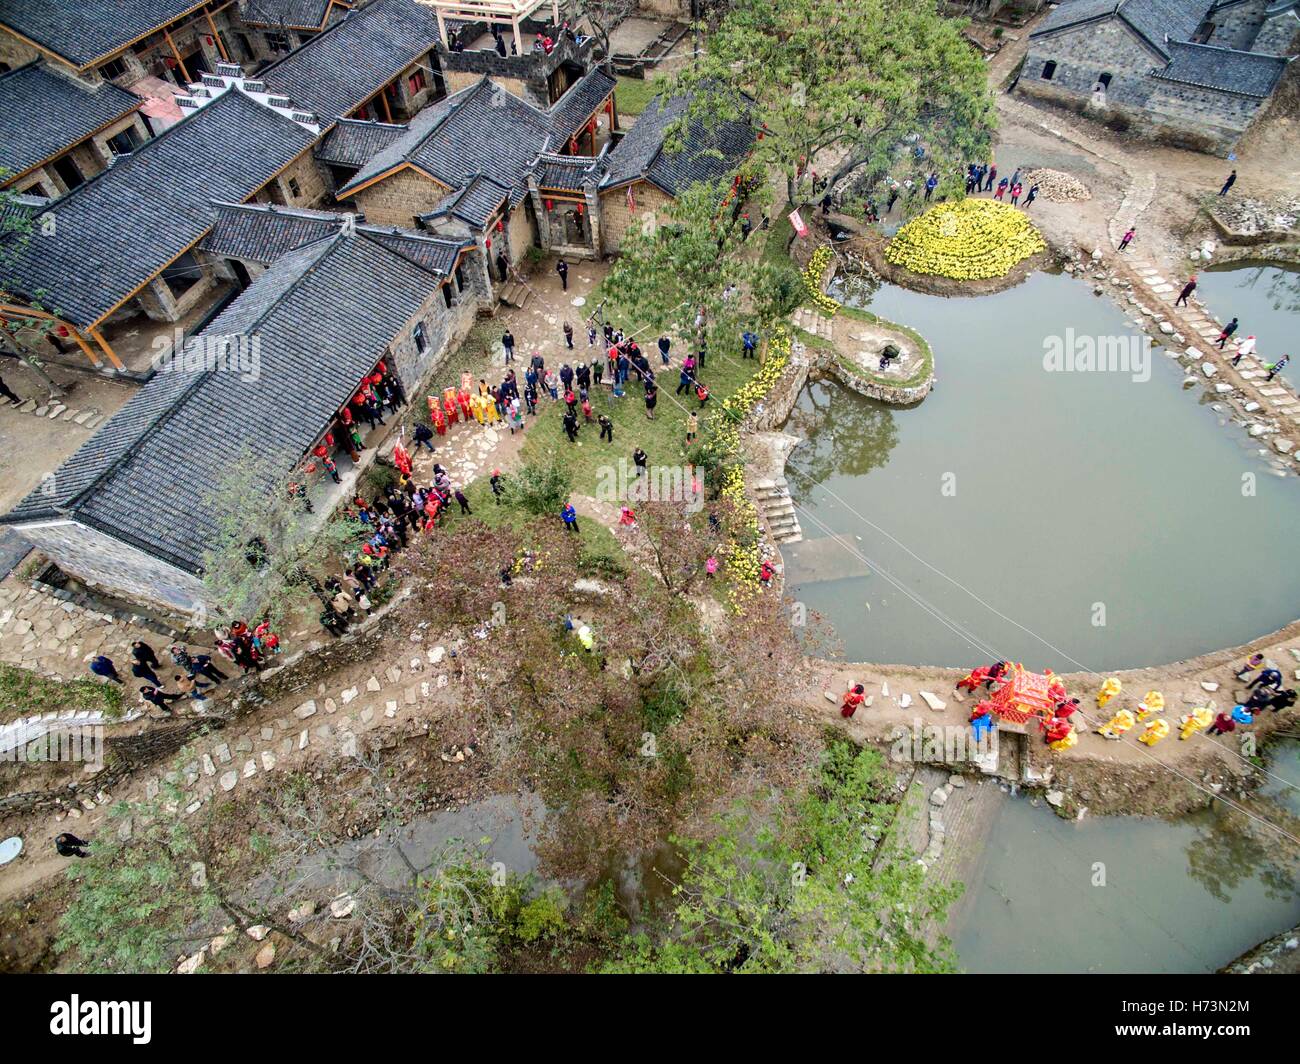 Dawu. 1st Nov, 2016. Aerial photo taken on Nov. 1, 2016 shows Jinling Village of Dawu County, central China's Hubei Province. After one year's effort, the impoverished Jinling Village became a tourist destination featuring ancient buildings and abundant nature resources. © Du Huaju/Xinhua/Alamy Live News Stock Photo